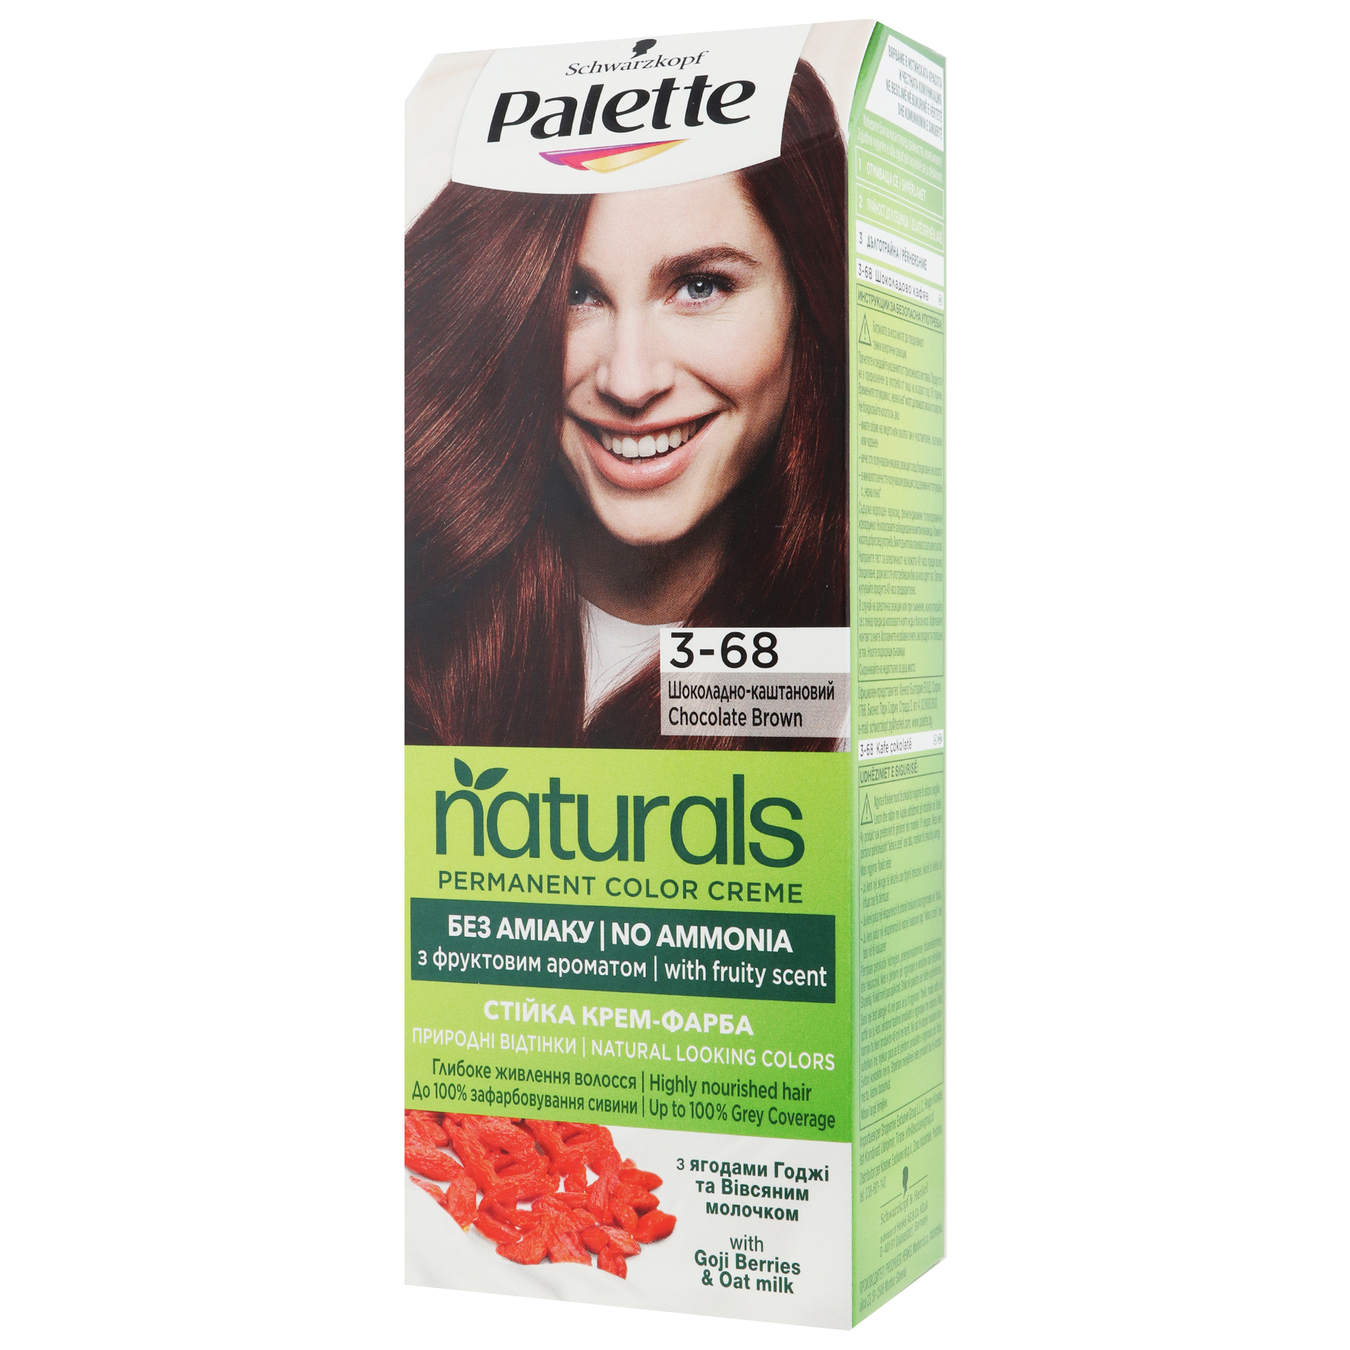 Cream paint Palette Naturals 3-68 Chocolate-chestnut without ammonia permanent hair color 110ml 3